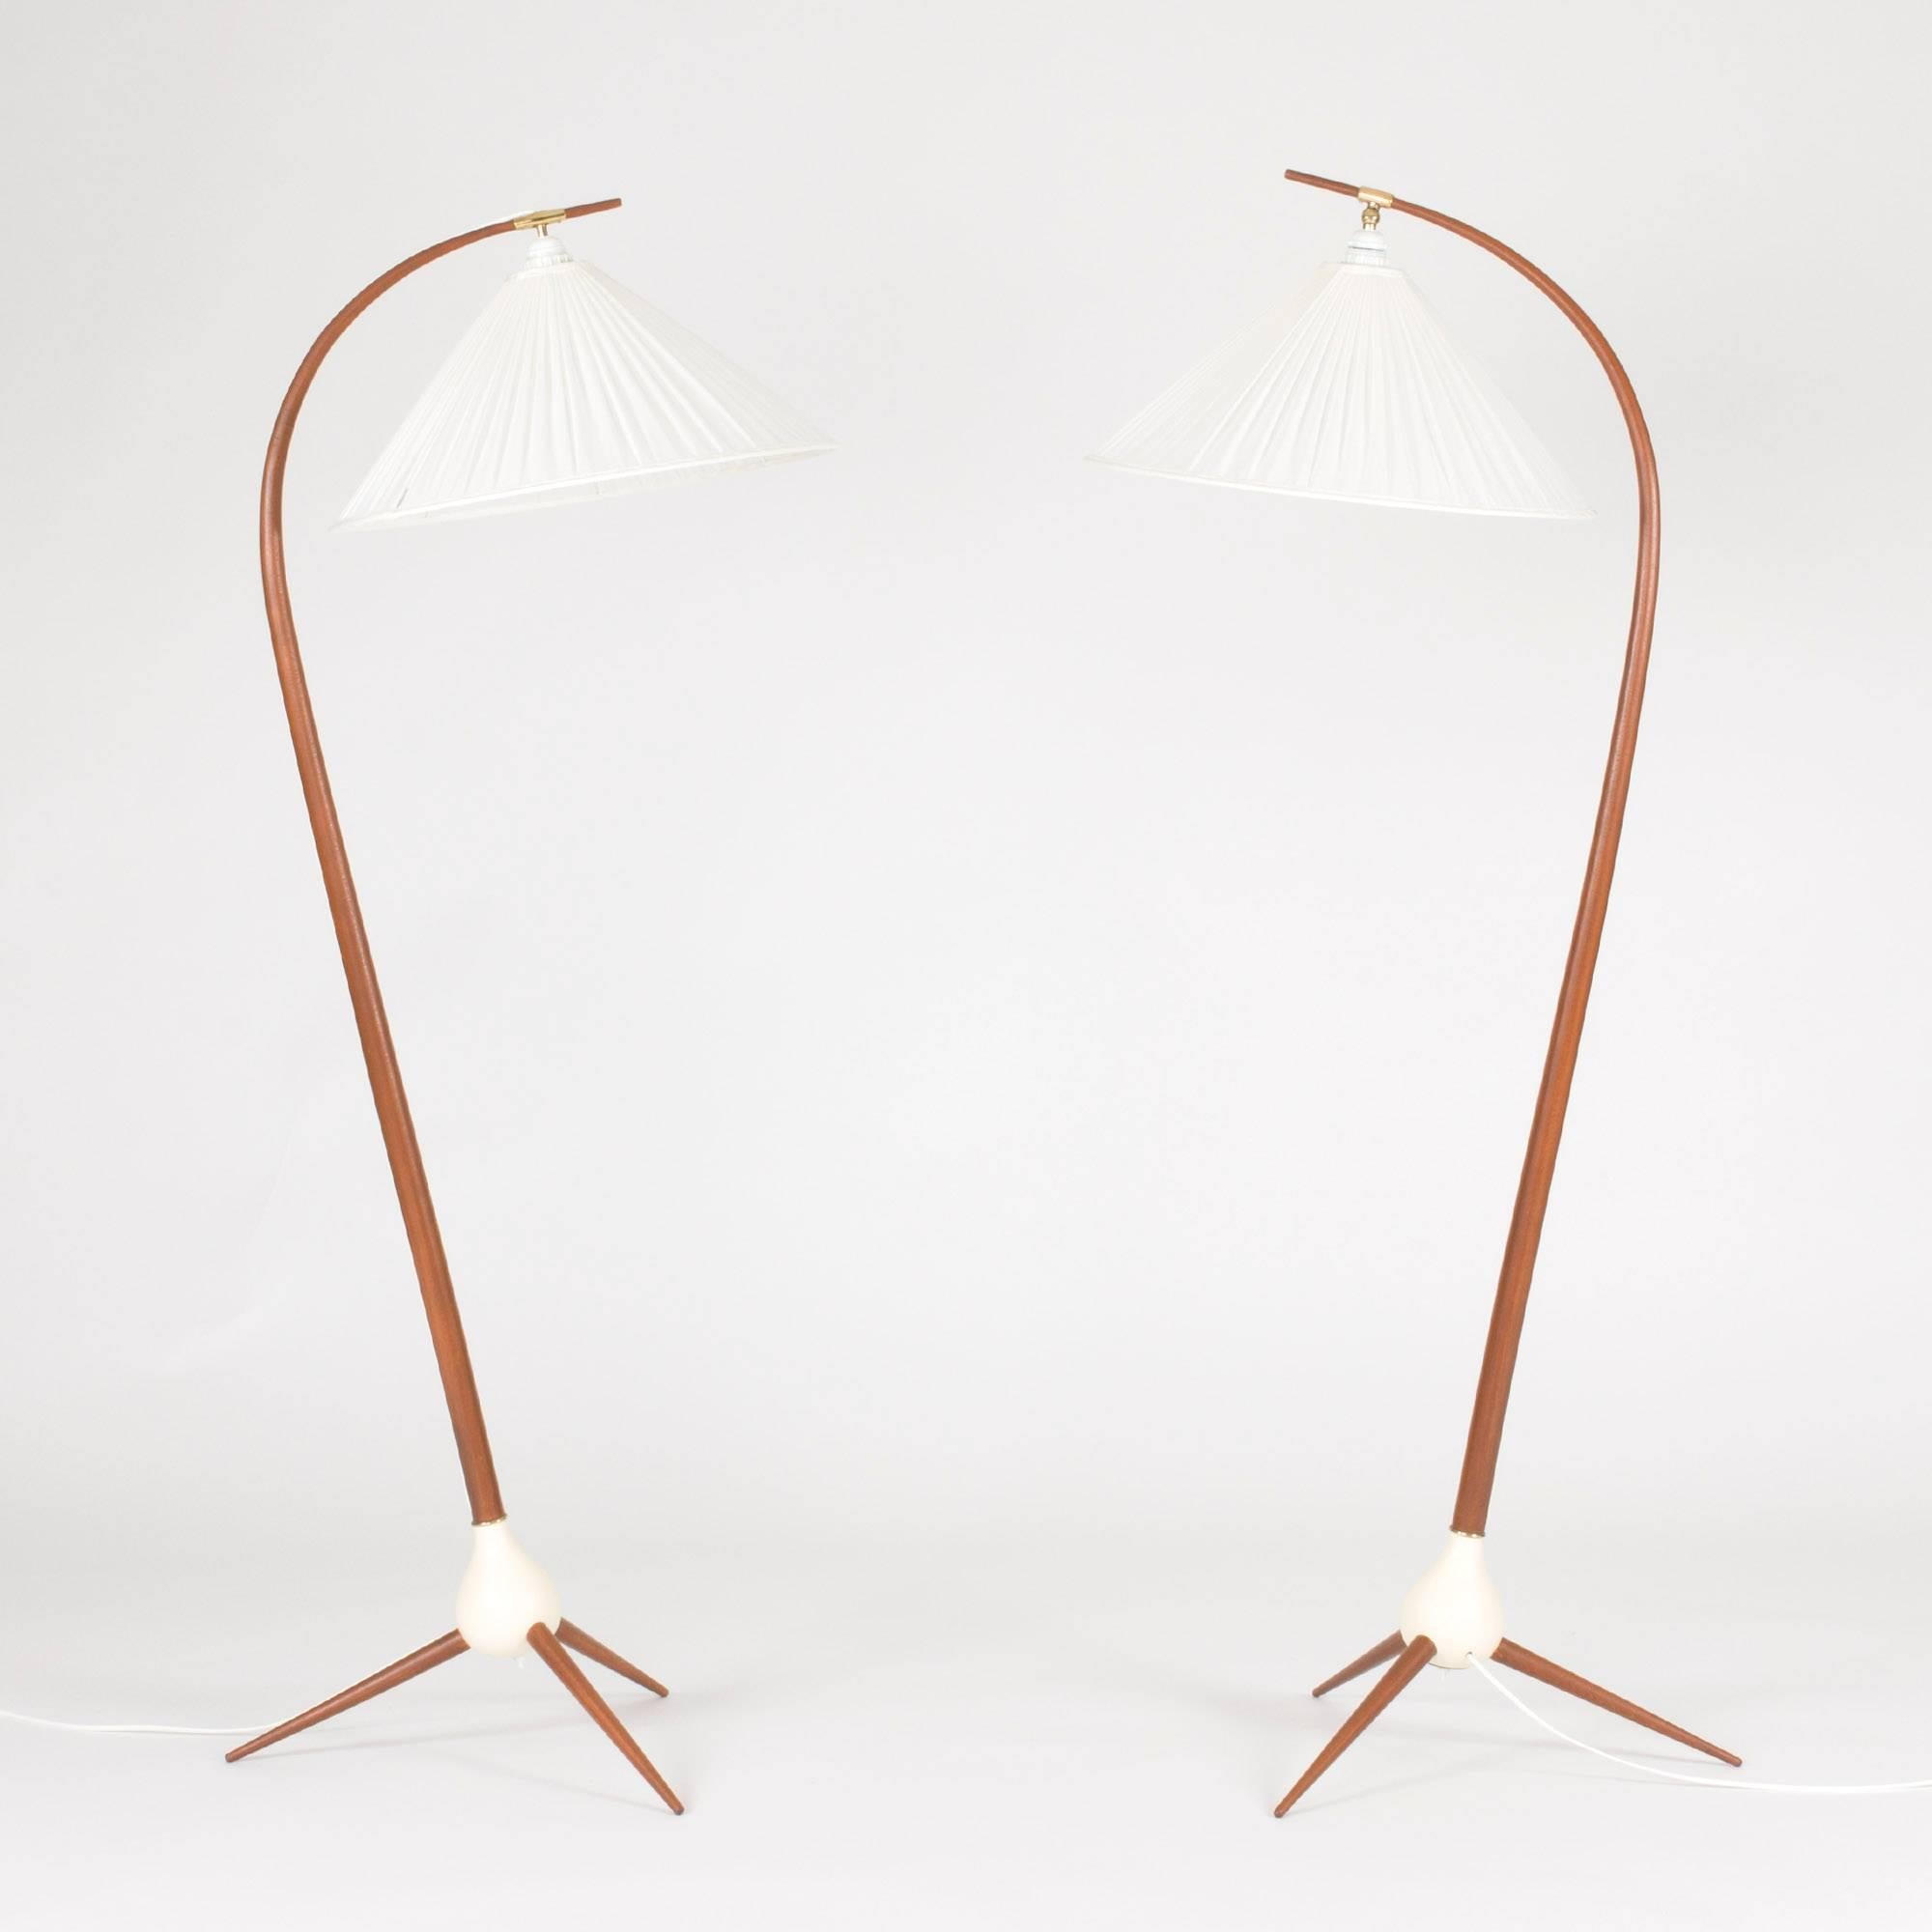 Pair of amazing floor lamps by Severin Hansen. The handles are made from teak bent into an elegant curve, with the wiring visible on the backs. The handles and three-legged bases are linked by an onion shaped wood form that is painted white. A rare,